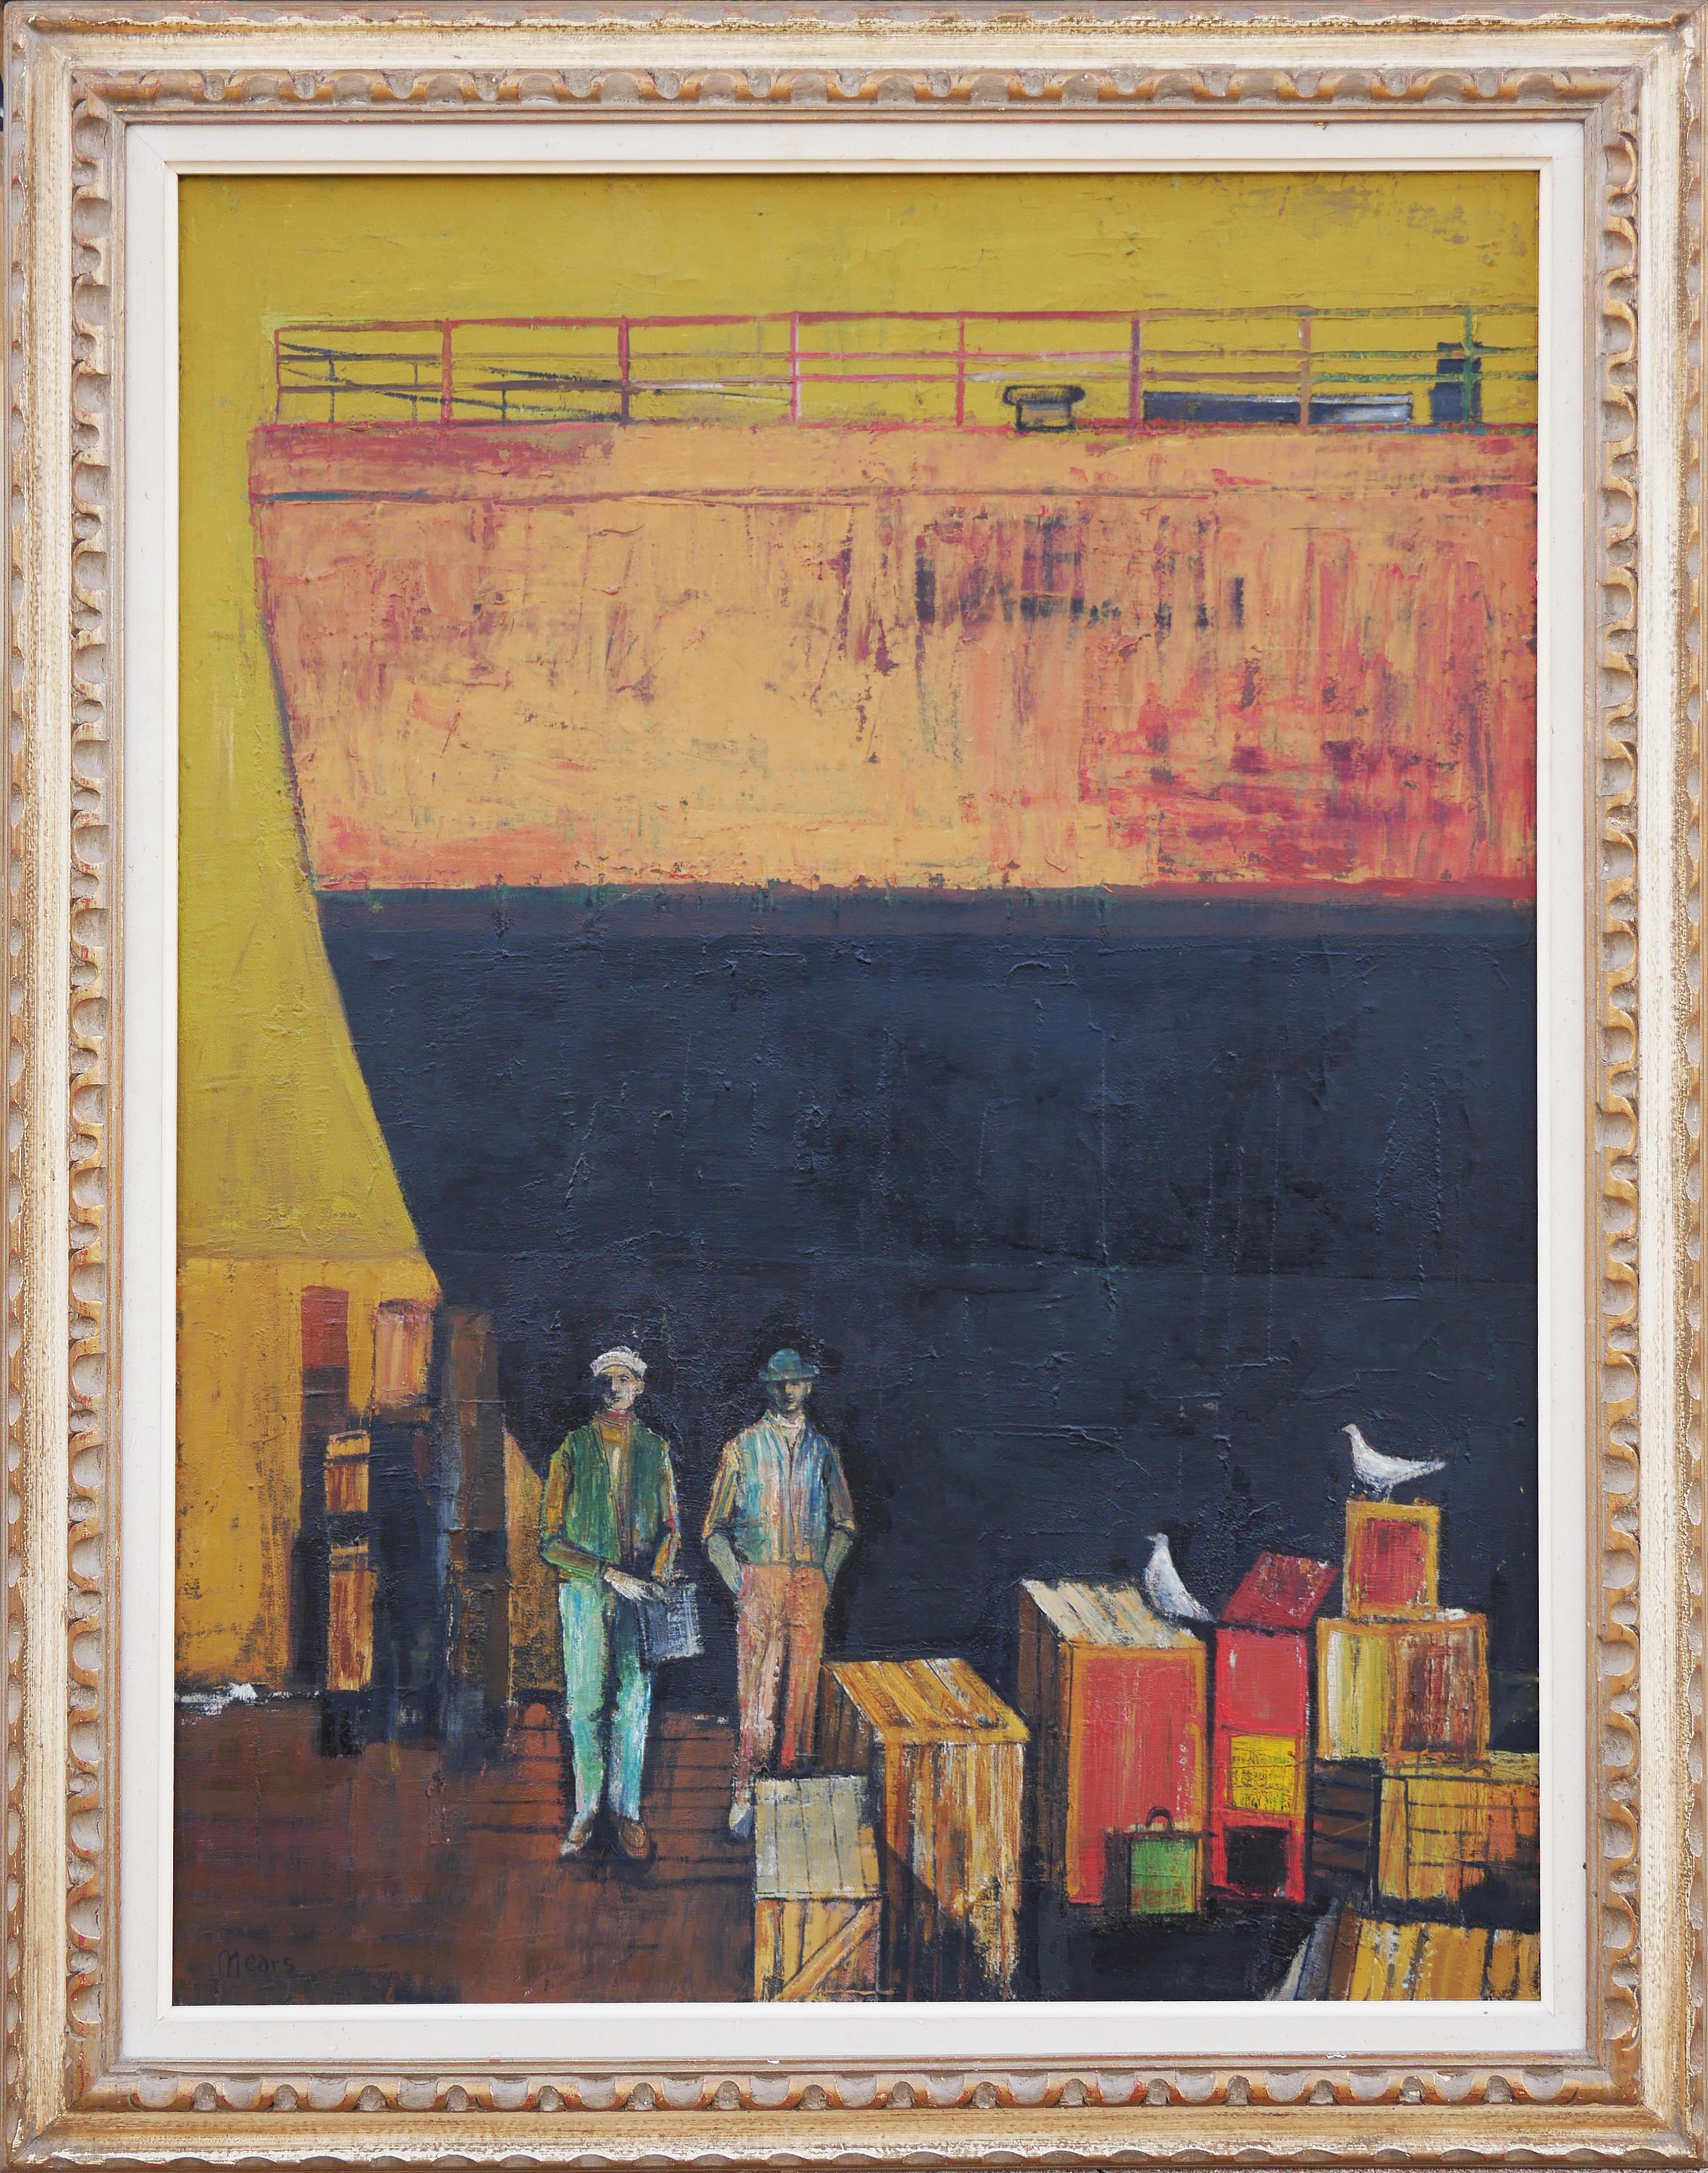 Earth-toned figurative modern painting by Texas artist Herb Mears. The painting features a shipping port with two men and white doves on top of shipping crates. The orange and black ship is painted against a yellow background, suggesting a